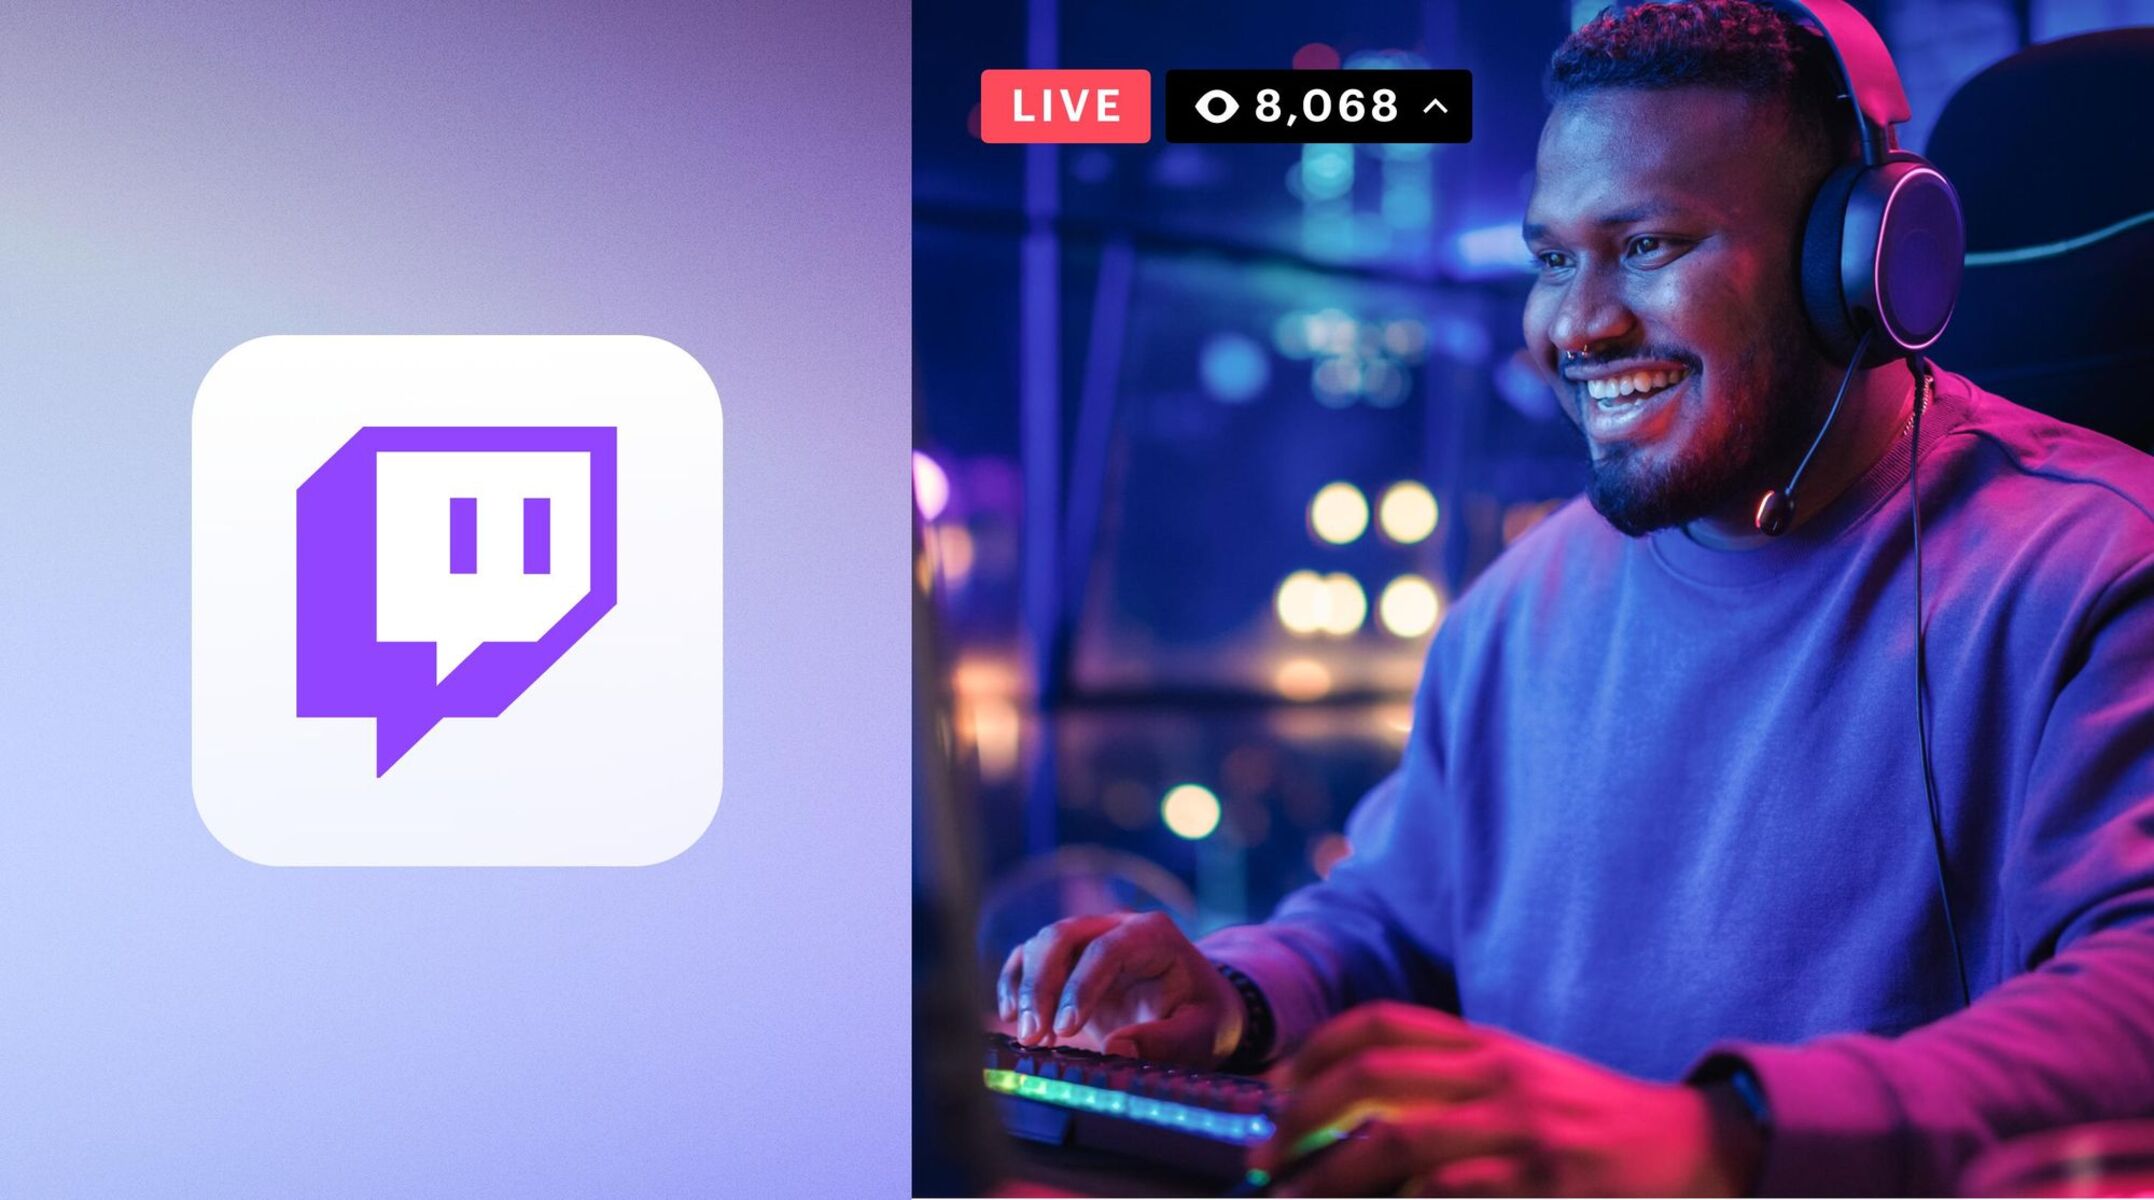 How To Live Stream On Twitch